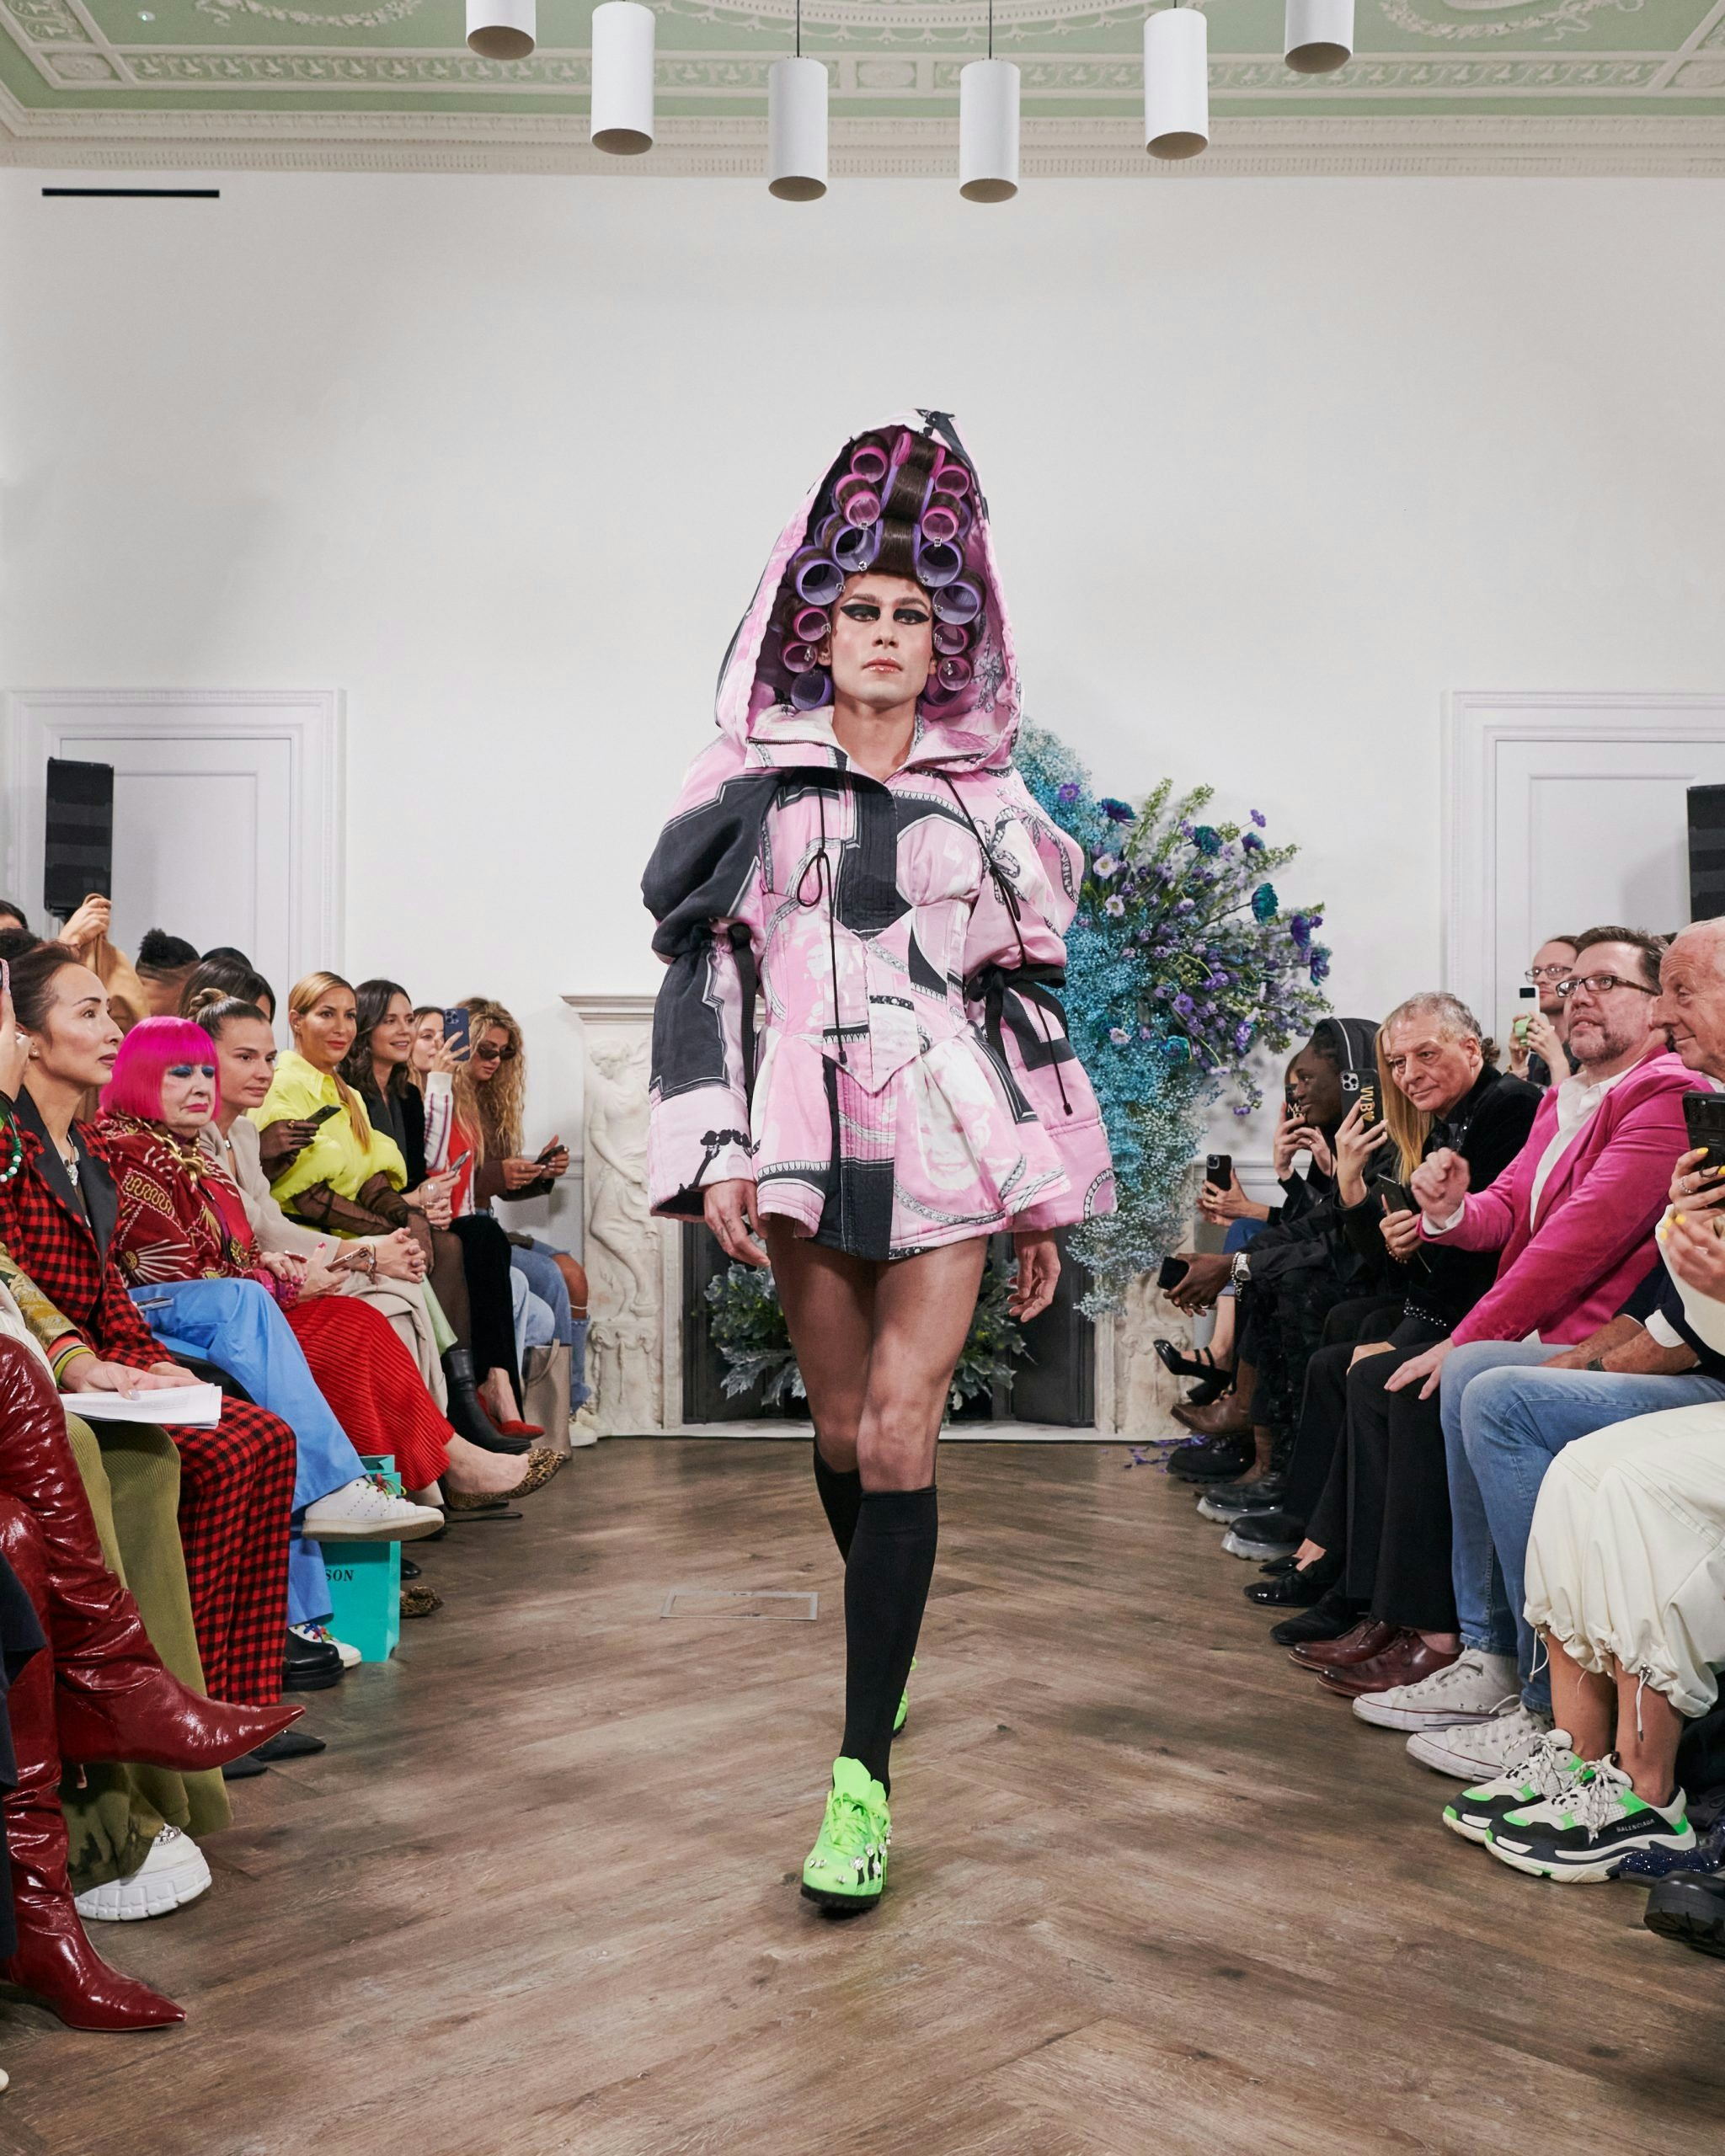 Marie Antoinette Goes To Liverpool collection featured models wearing rollers, the stereotypical Scouse signature. Photo: Patrick McDowell